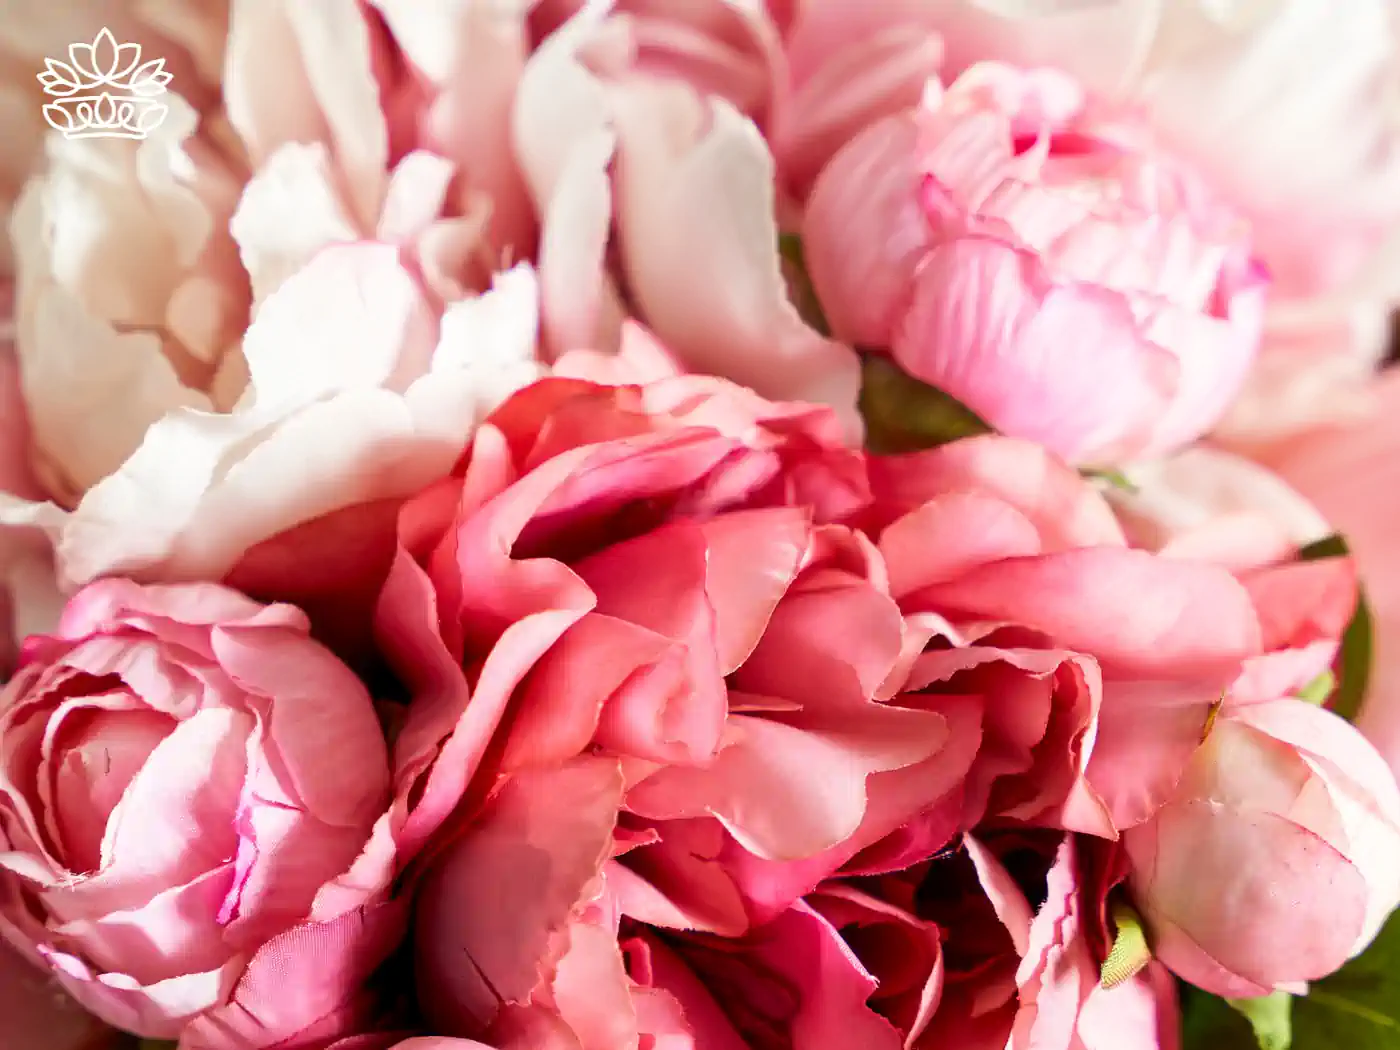 Close-up of a luxurious bouquet featuring pink and white peonies. Fabulous Flowers and Gifts, Luxury Flower Arrangements.